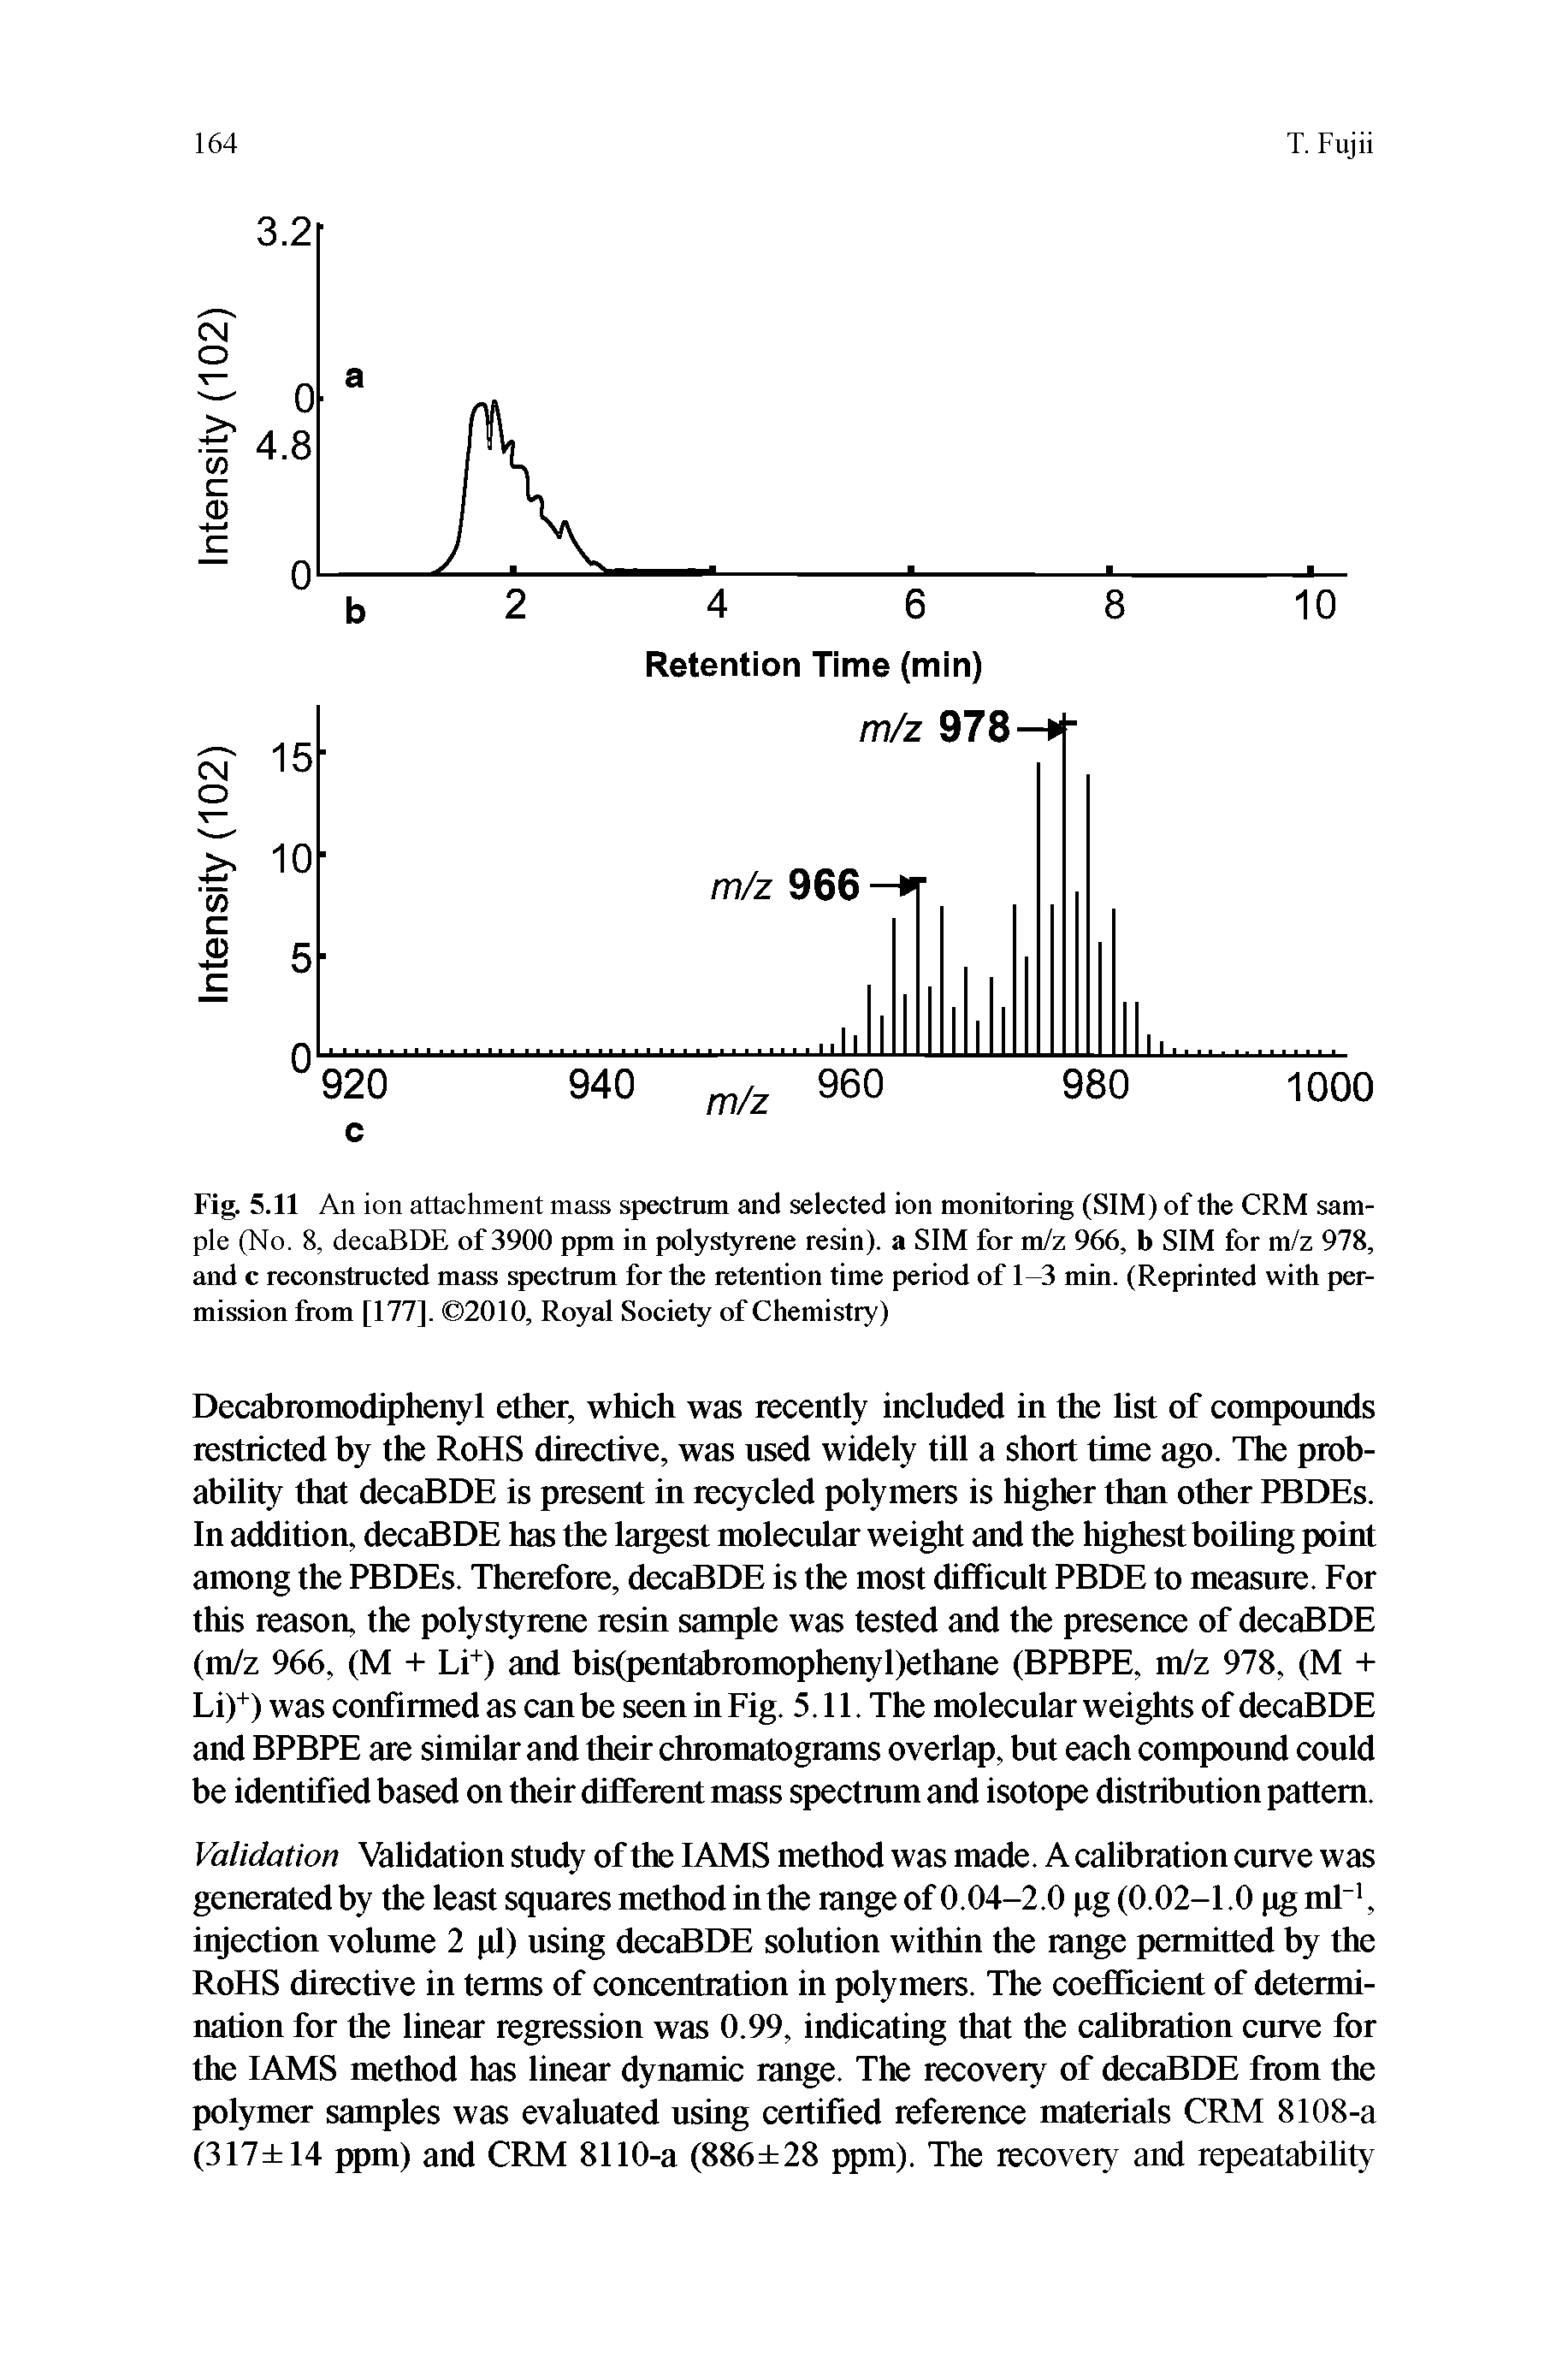 Fig. 5.11 An ion attachment mass spectrum and selected ion monitoring (SIM) of the CRM sample (No. 8, decaBDE of 3900 ppm in polystyrene resin), a SIM for m/z 966, b SIM for m/z 978, and c reconstructed mass spectrum for the retention time period of 13 min. (Reprinted with permission from [177]. 2010, Royal Society of Chemistry)...